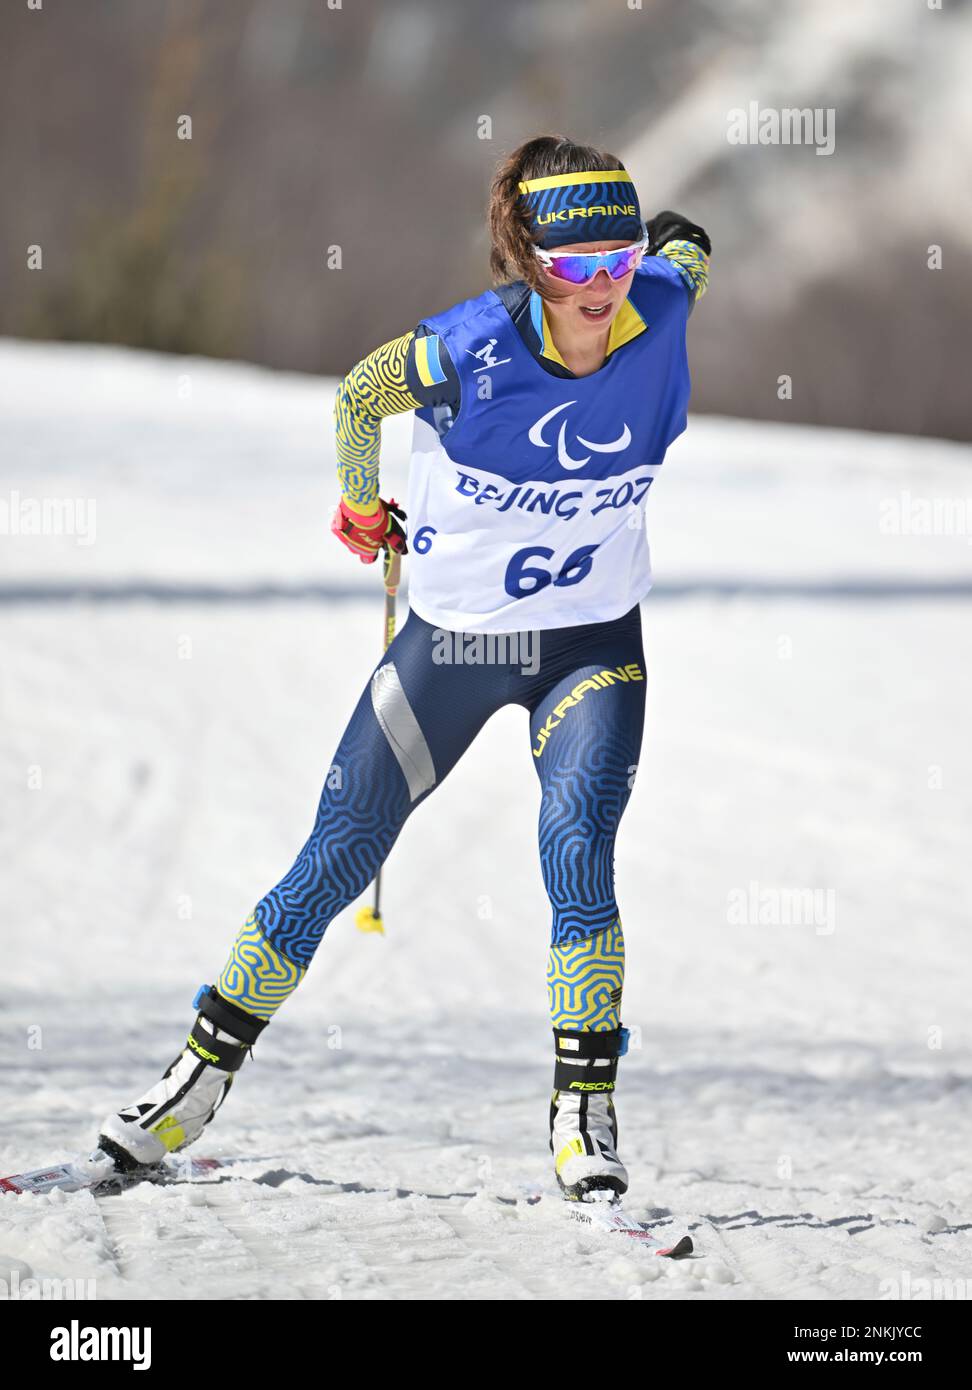 Ukraines BUI Iryna competes during the Womens Middle Distance Free Technique Standing at Zhangjiakou National Biathlon Center in Zhangjiakou, China on March 12, 2022